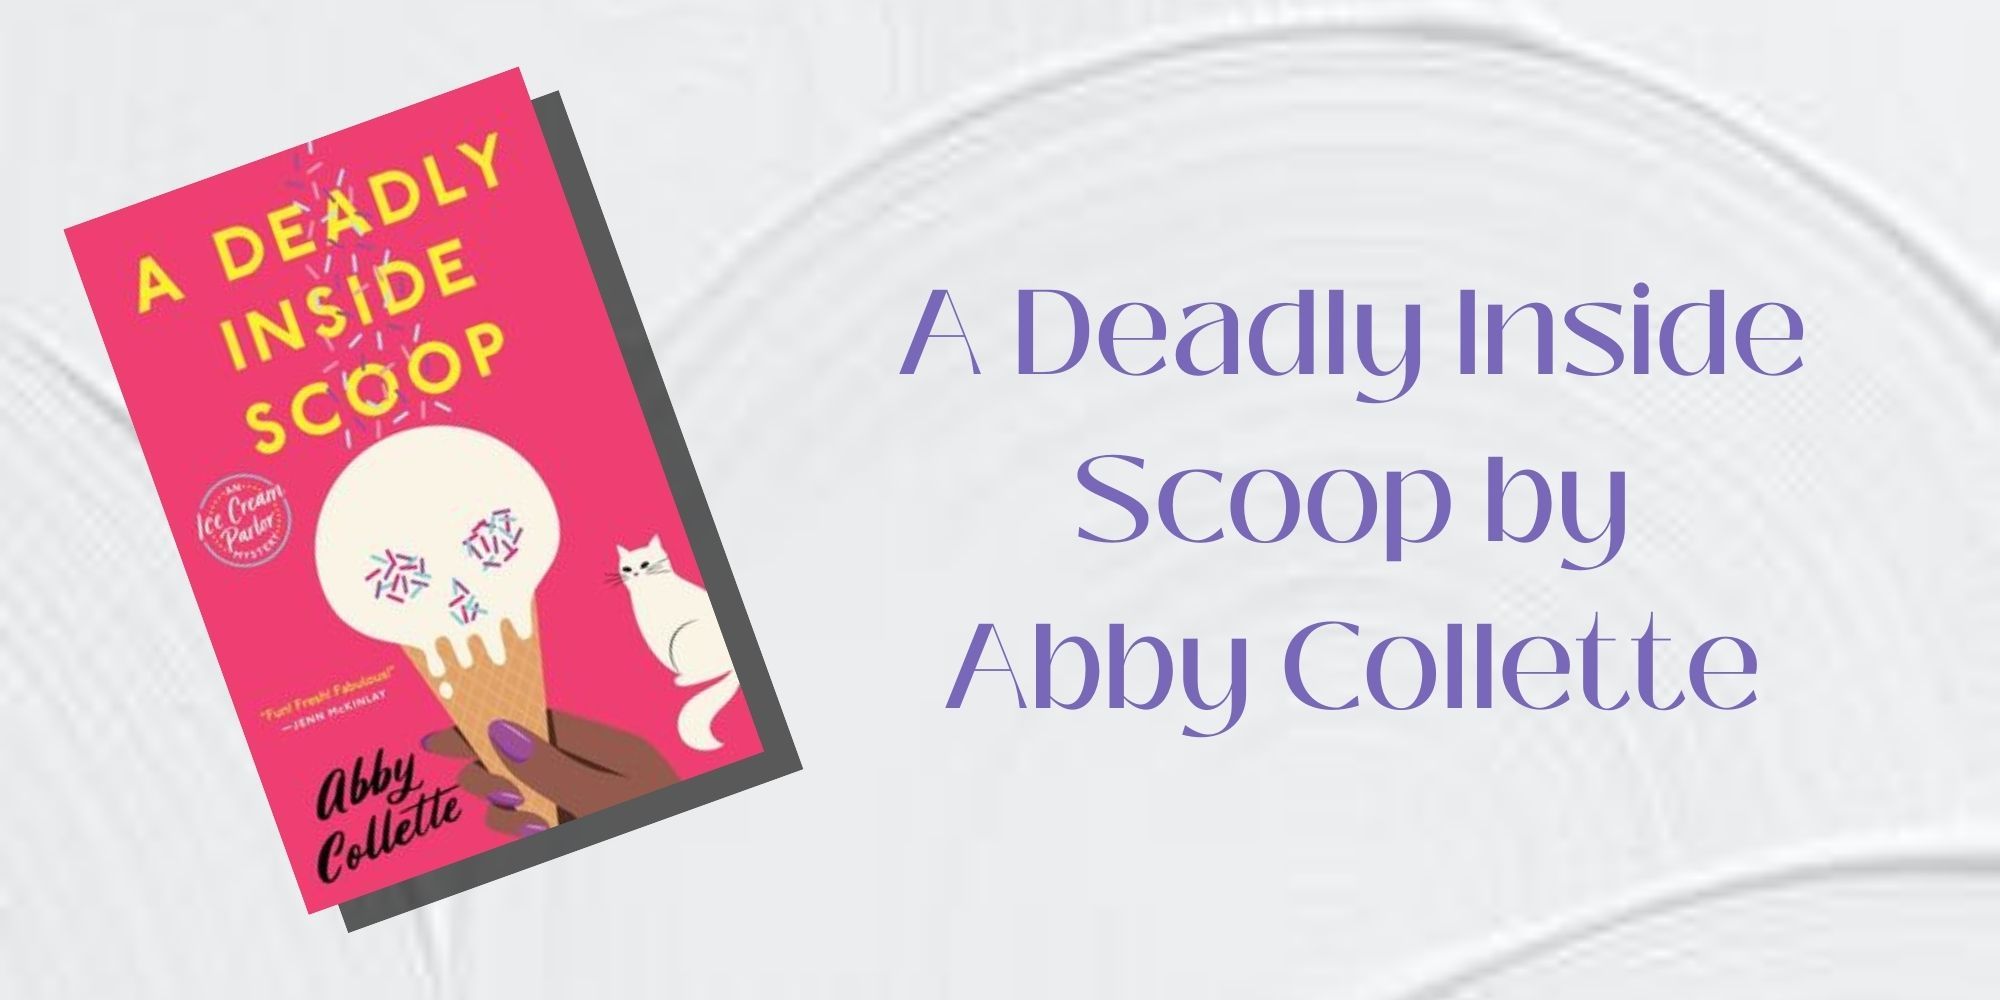 The cover of A Deadly Inside Scoop by Abby Collette